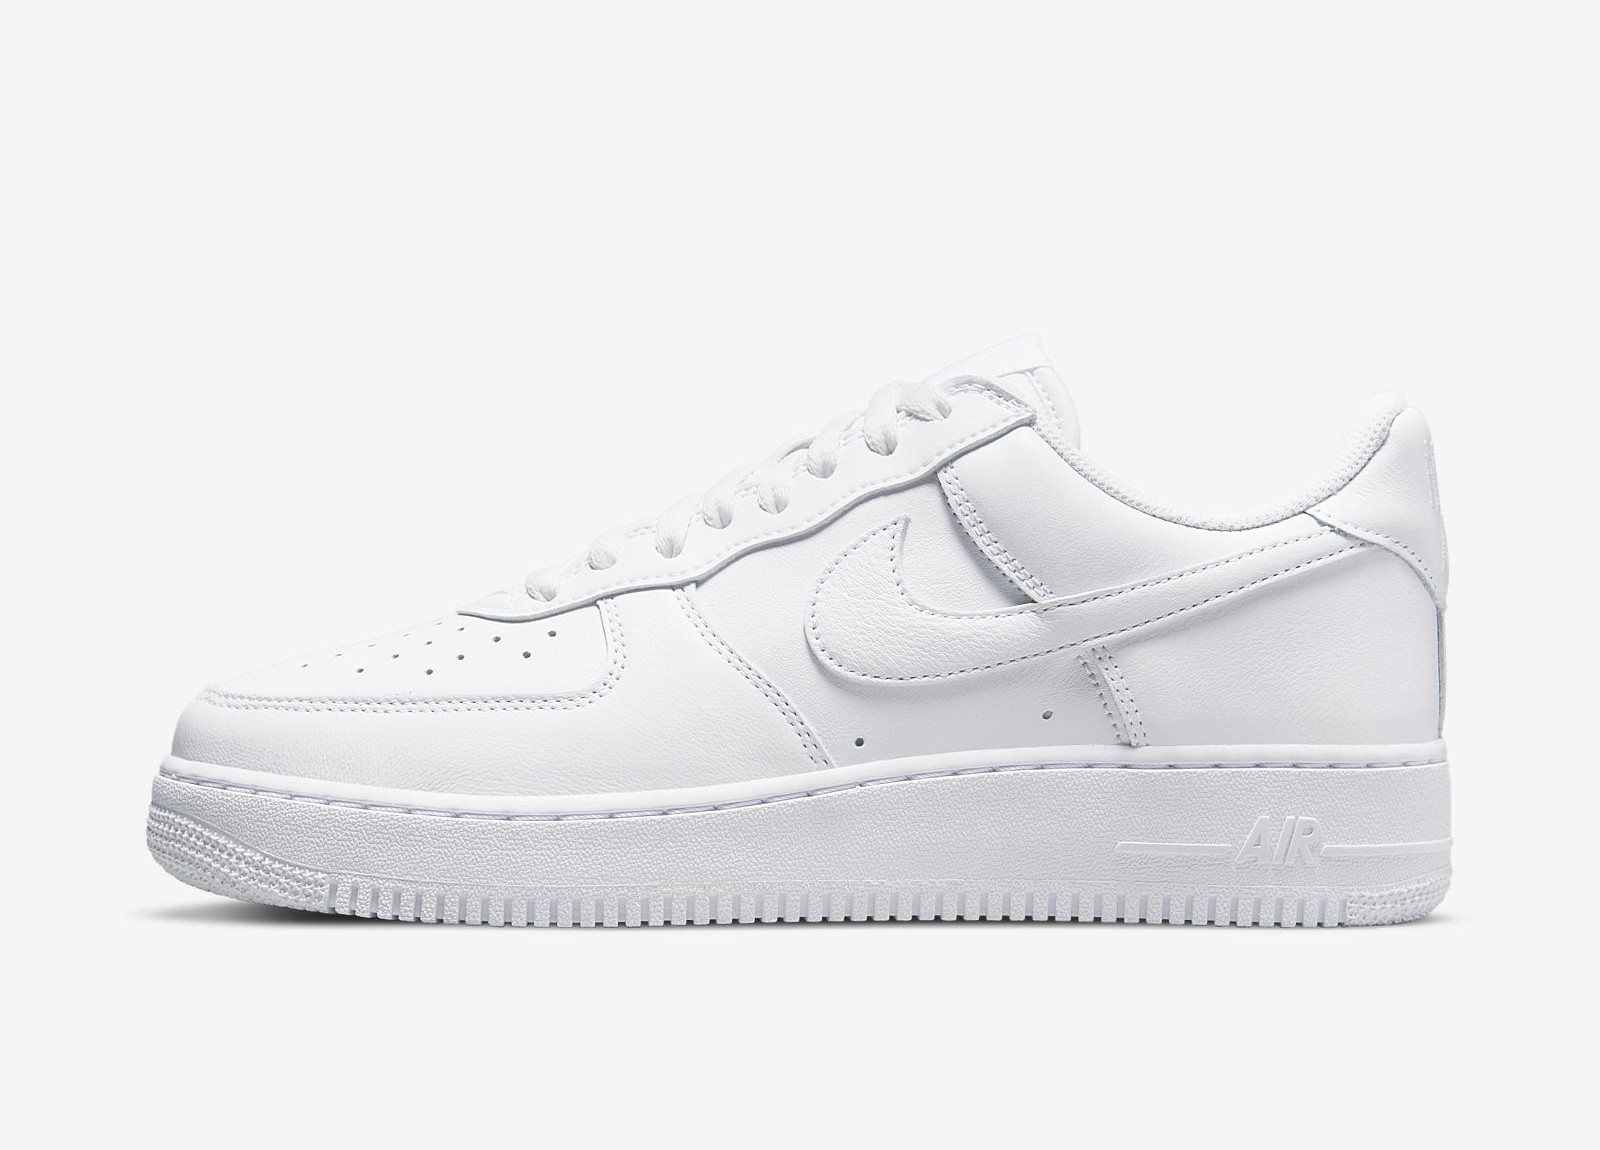 Nike Air Force 1 Low Retro
« Color of the Month »